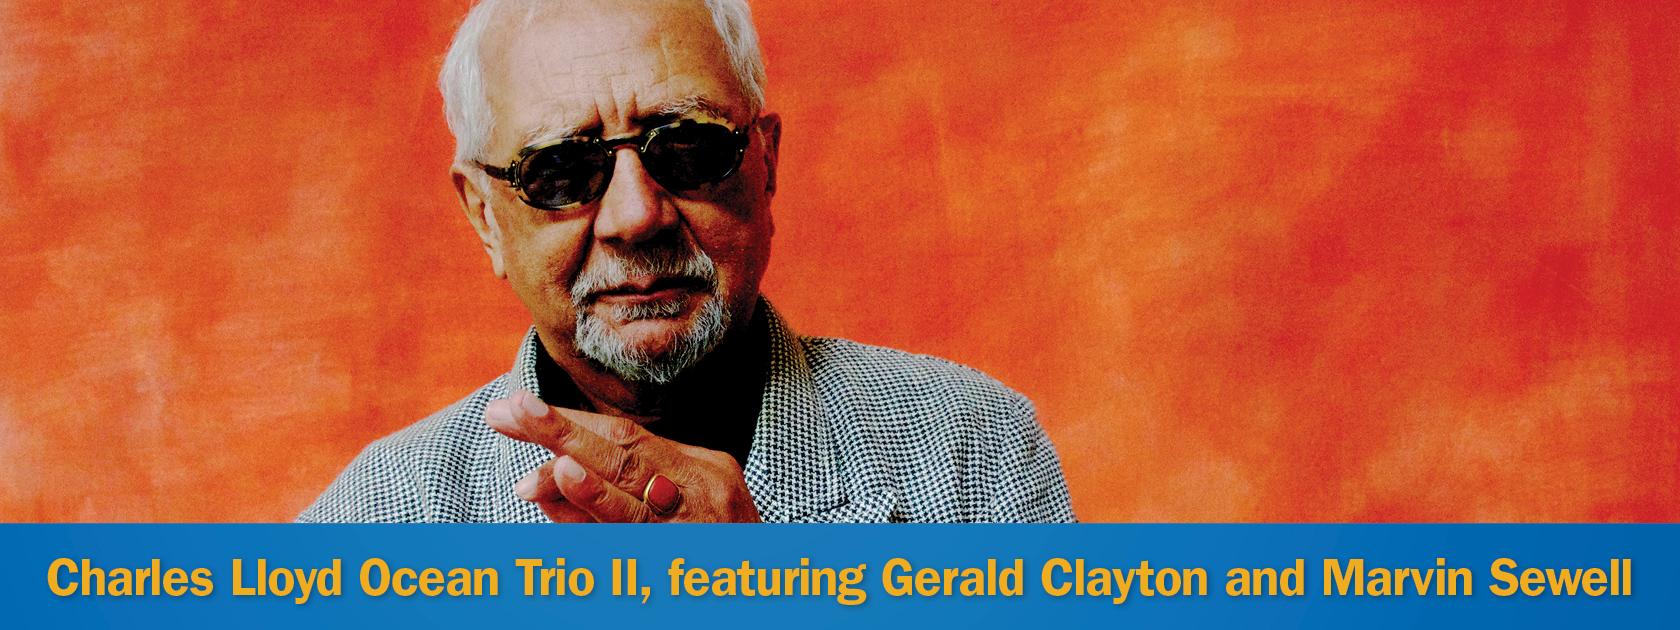 Charles Lloyd Ocean Trio II featuring Gerald Clayton and Marvin Sewell